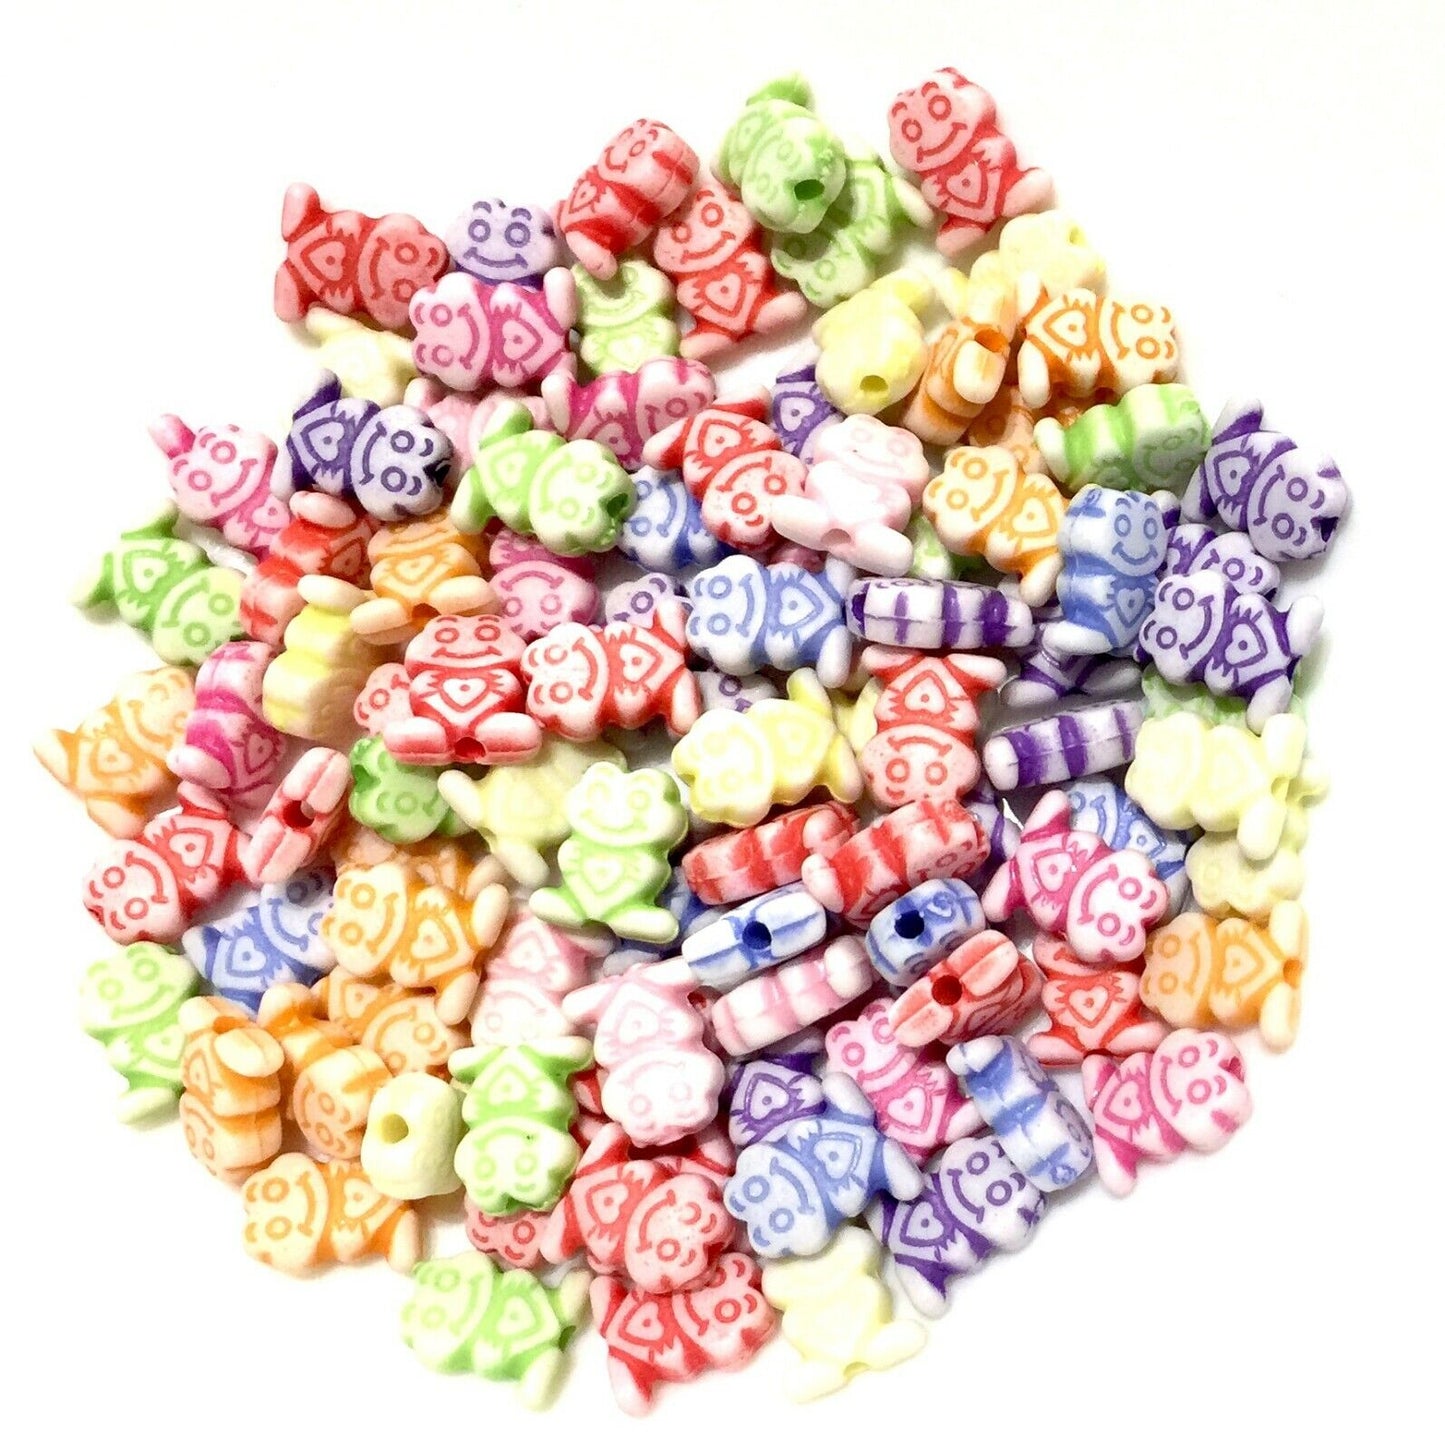 100 pcs Cute Creatures and Creations Spacer Beads - Pick Your Style